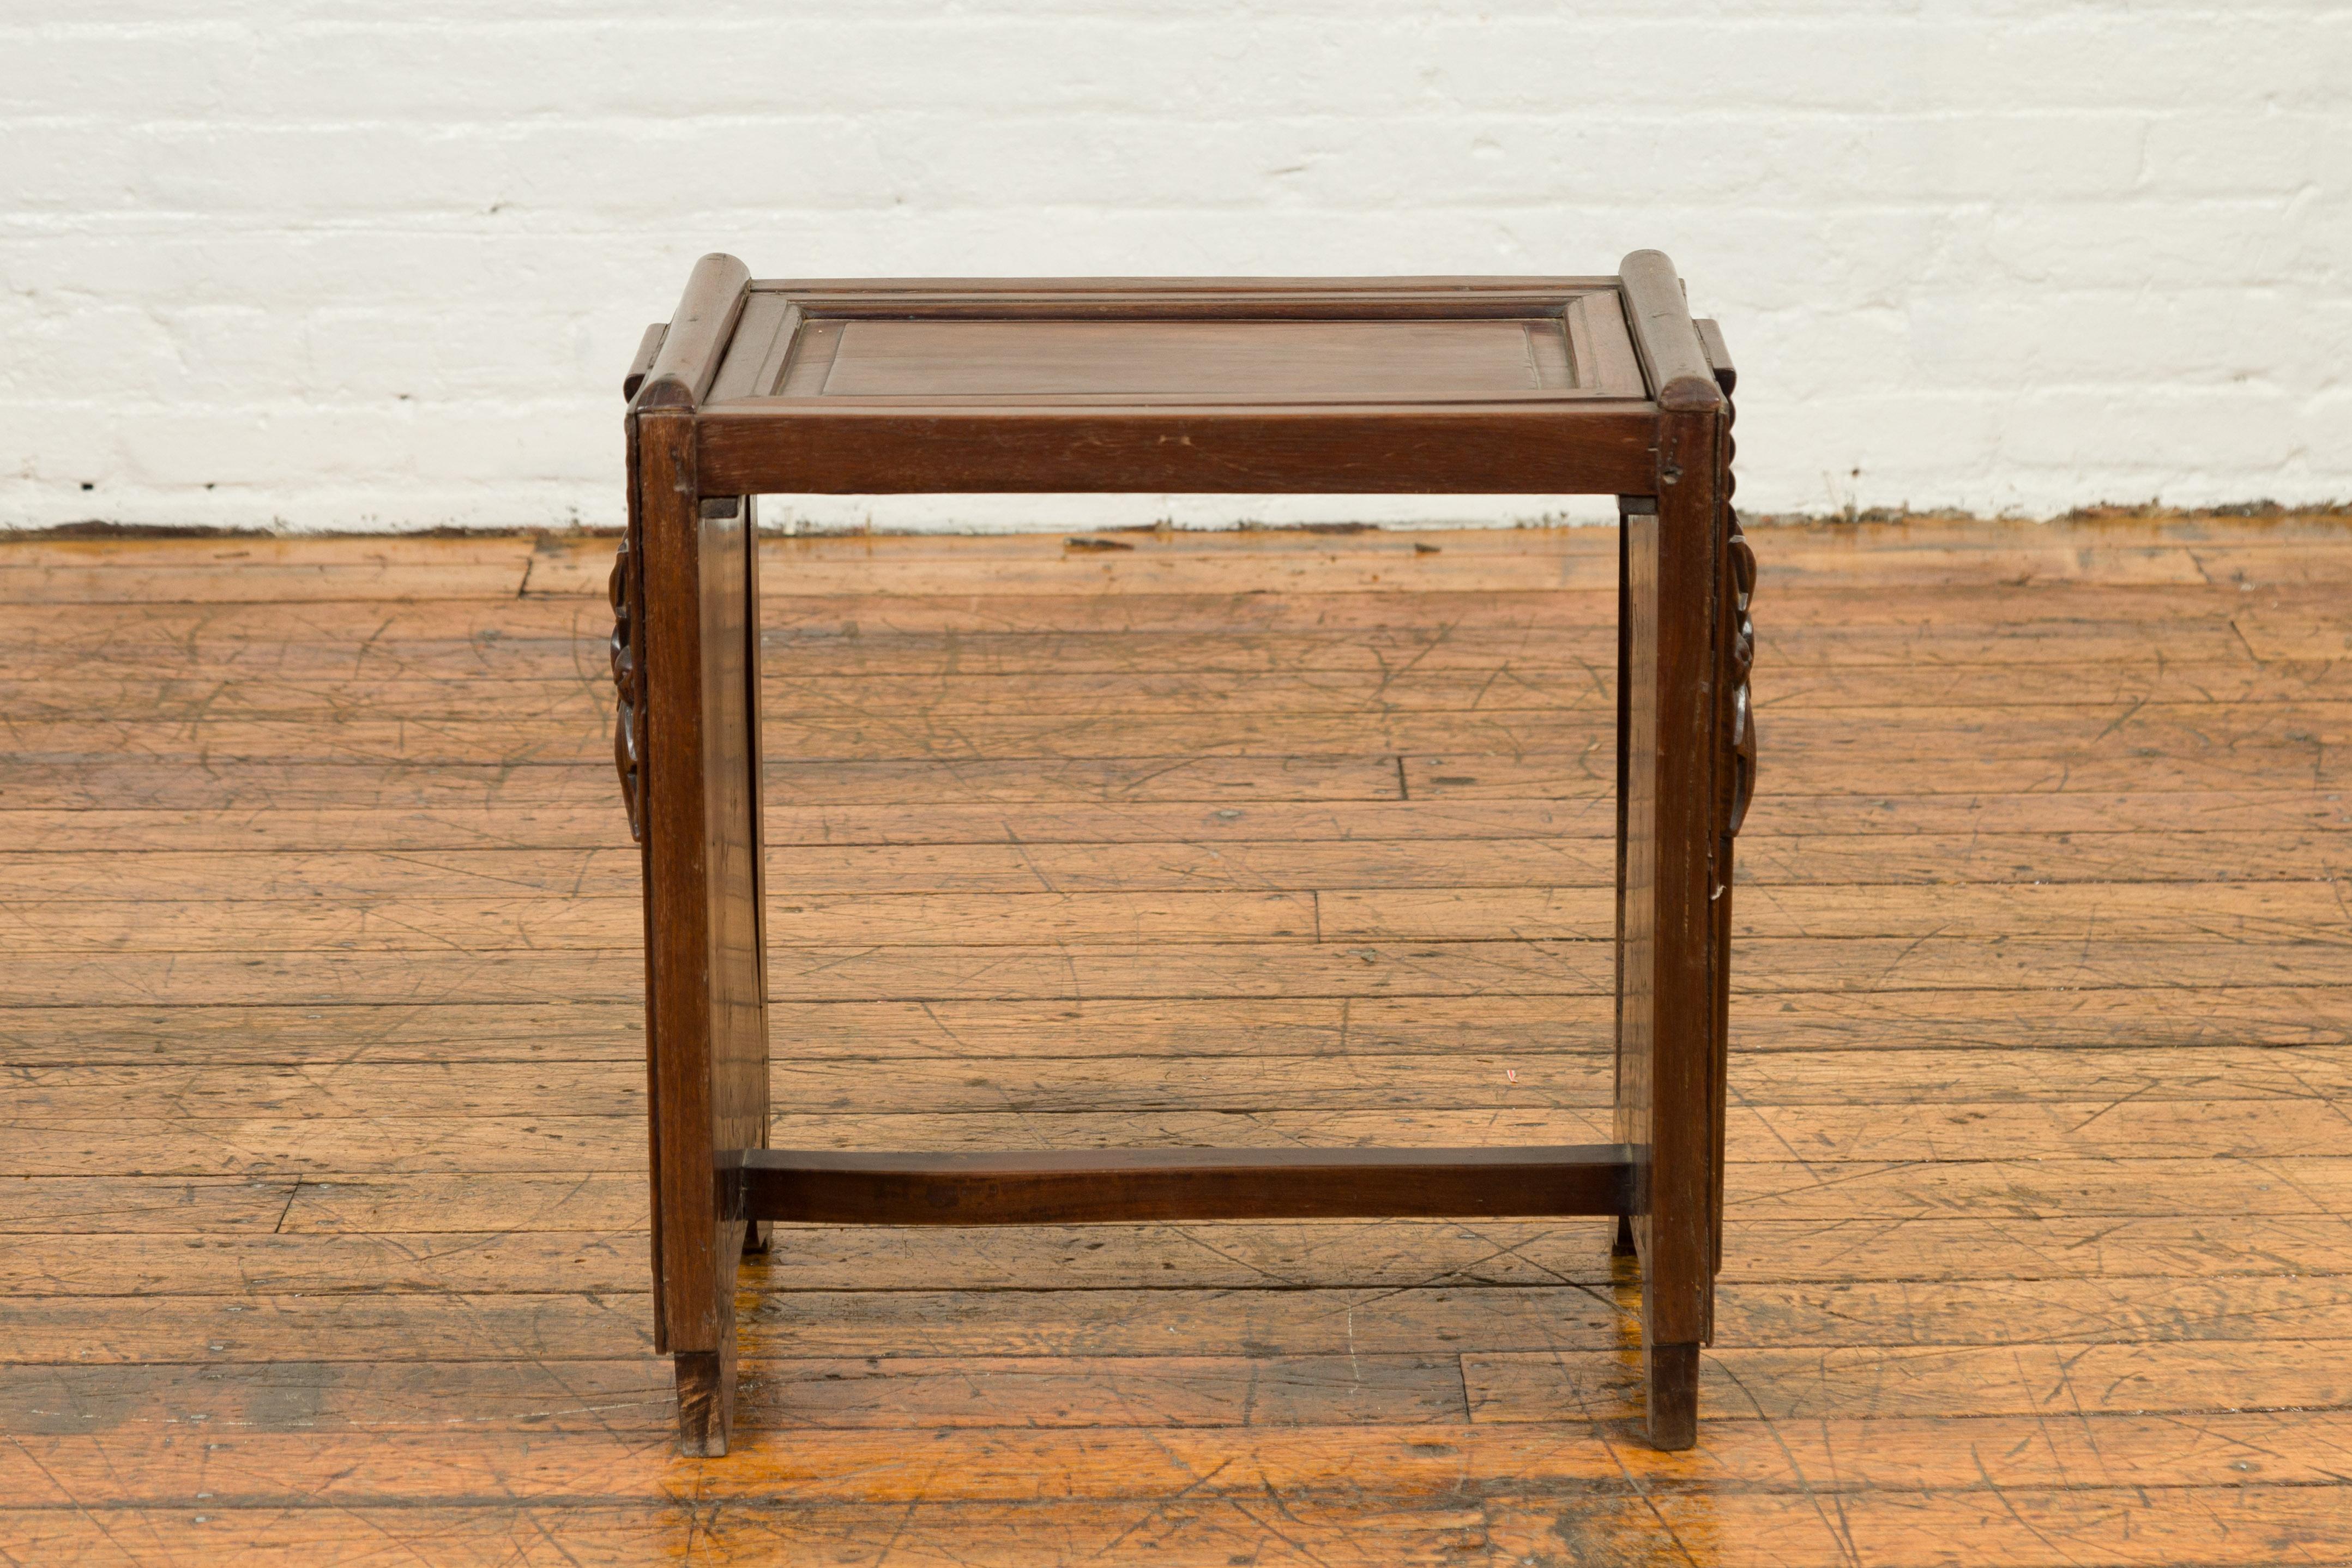 A Chinese antique side table from the early 20th century, with removable top, carved floral motifs and unusual shape. Created in China during the early years of the 20th century, this wooden side table features a rectangular removable top sitting